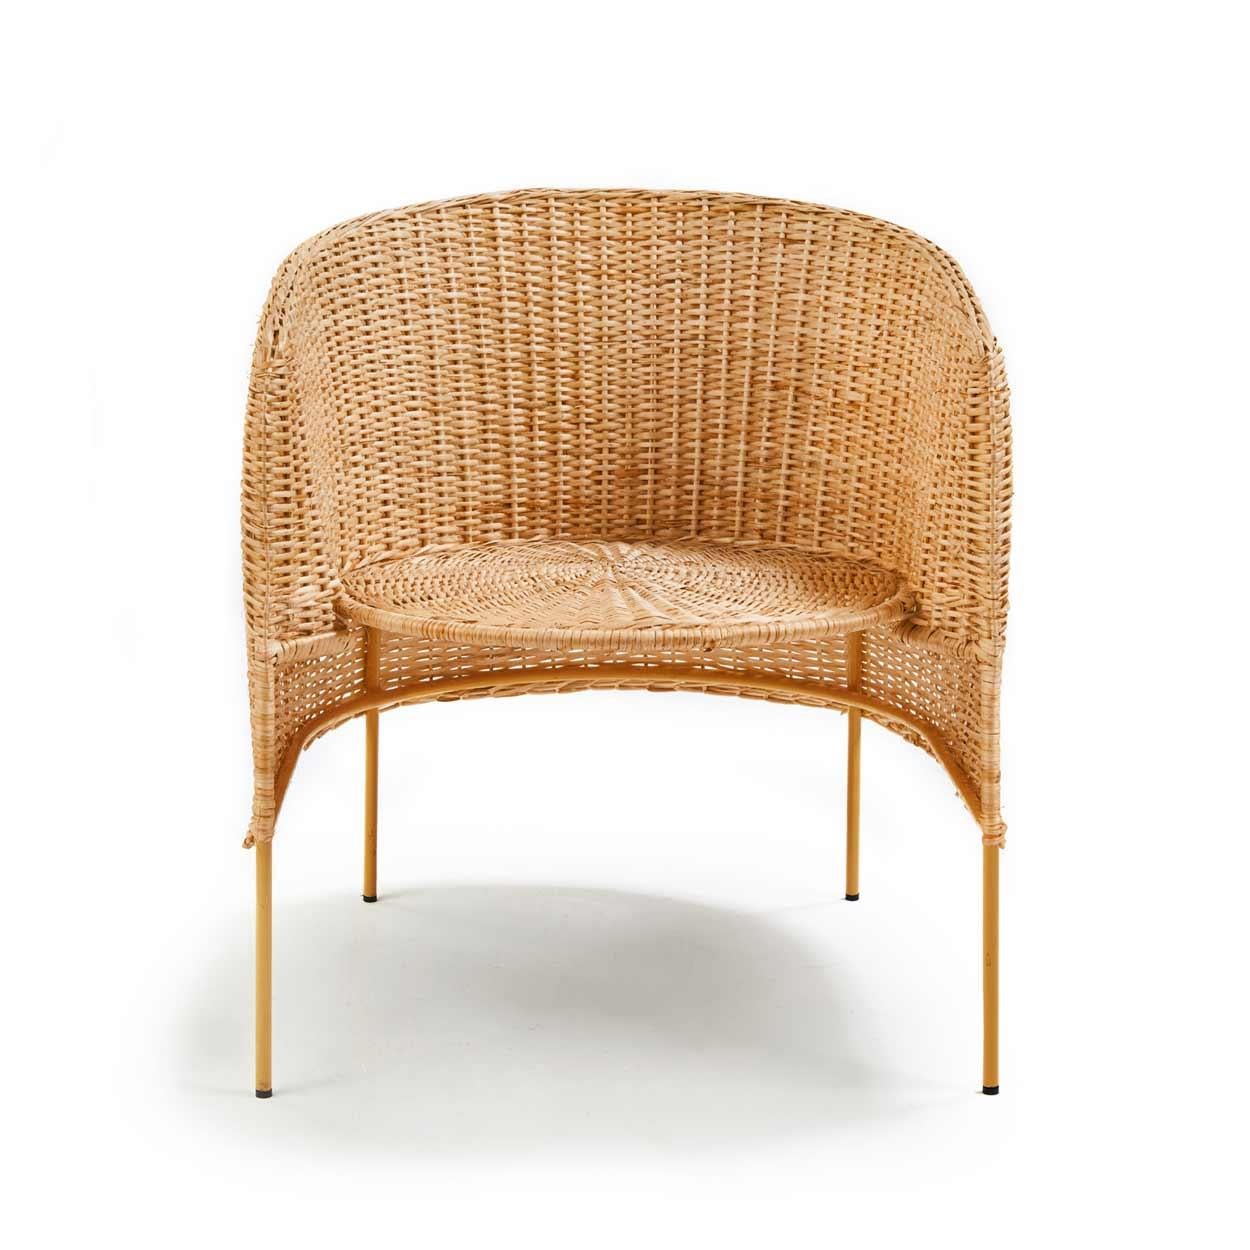 Material
Wicker from Bejuco roots. Galvanized and powder coated tubular steel frame
The Caribe Natural Lounge Chair is a design by Sebastian Herkner, featuring a beautiful wicker webbing. The shape of the chair follows our popular Caribe and Caribe